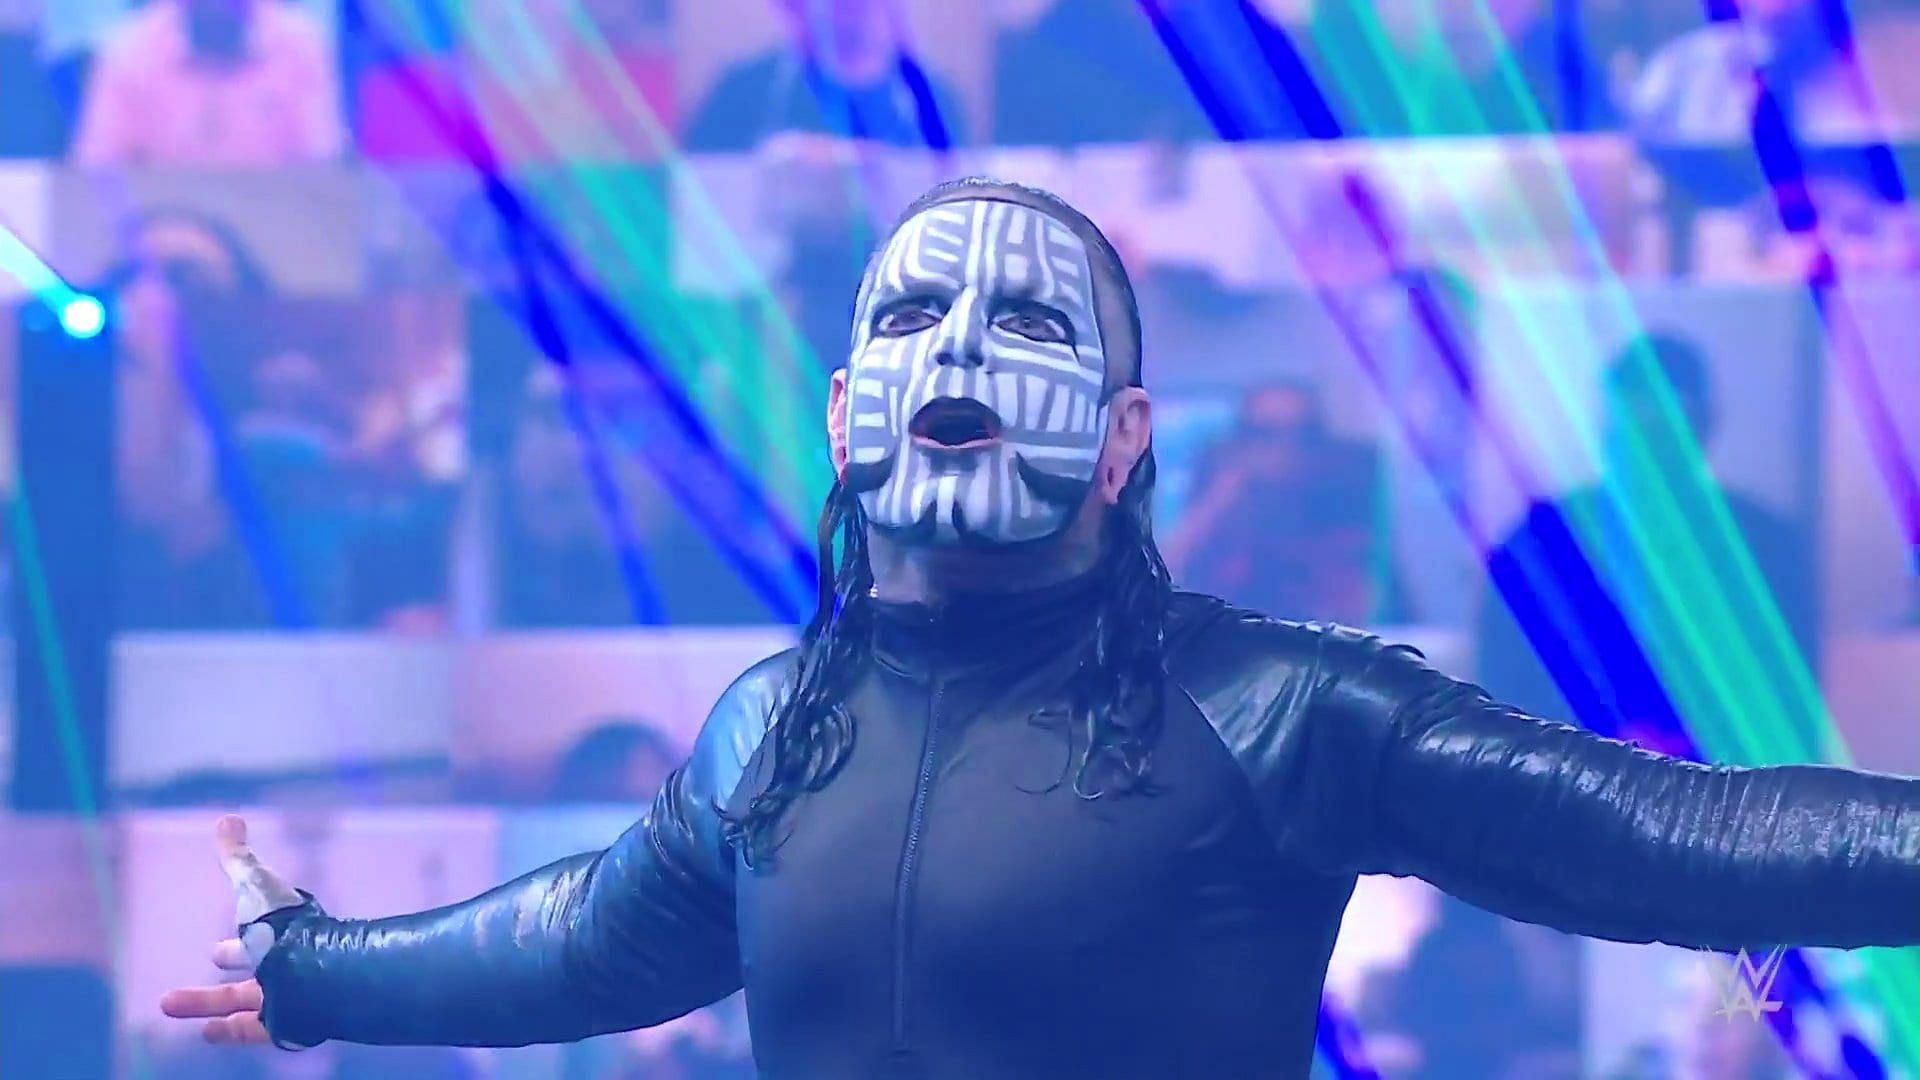 Jeff Hardy was in his home state of North Carolina this week on SmackDown